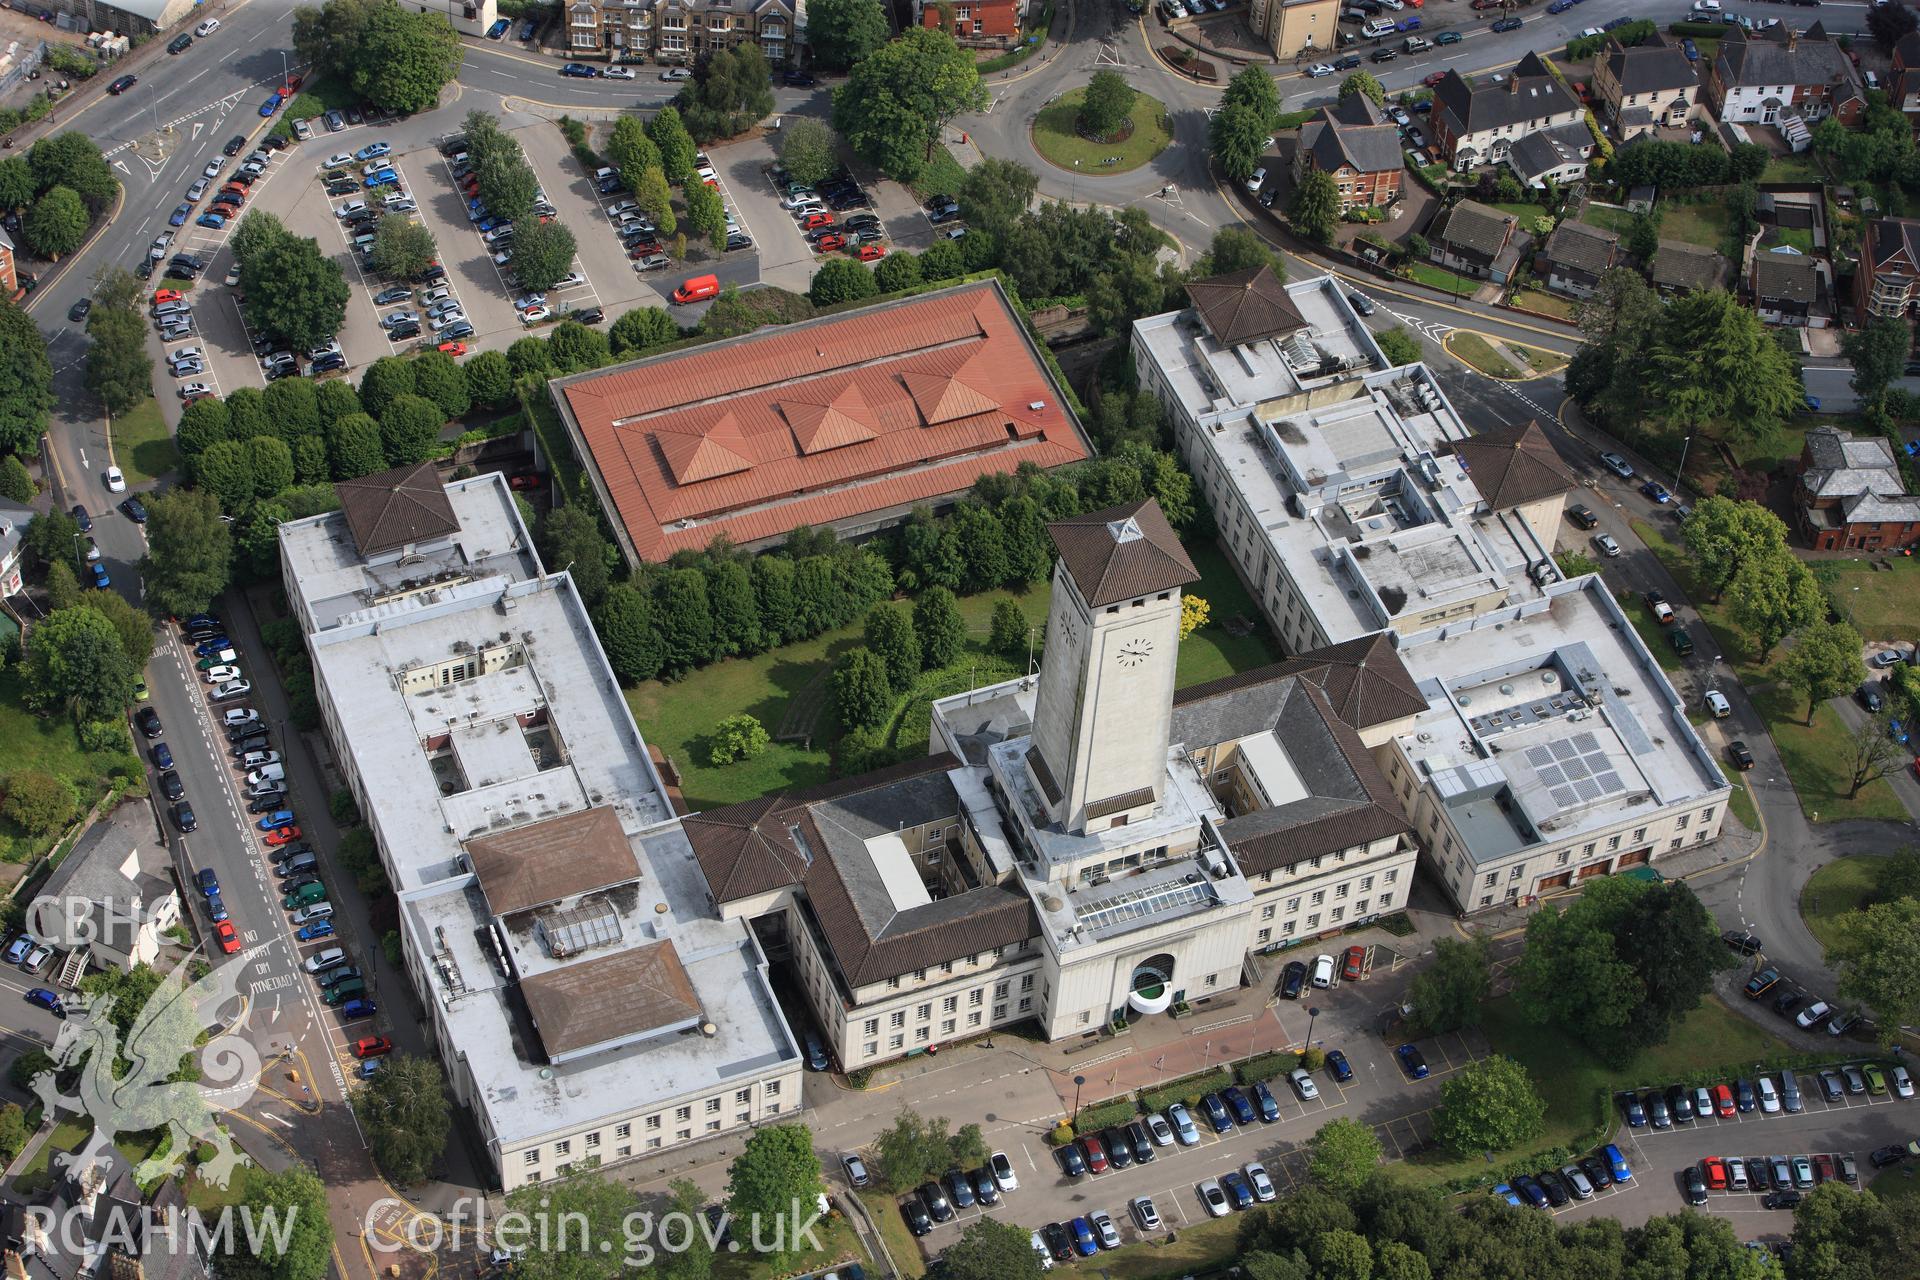 RCAHMW colour oblique photograph of Newport civic centre. Taken by Toby Driver on 13/06/2011.